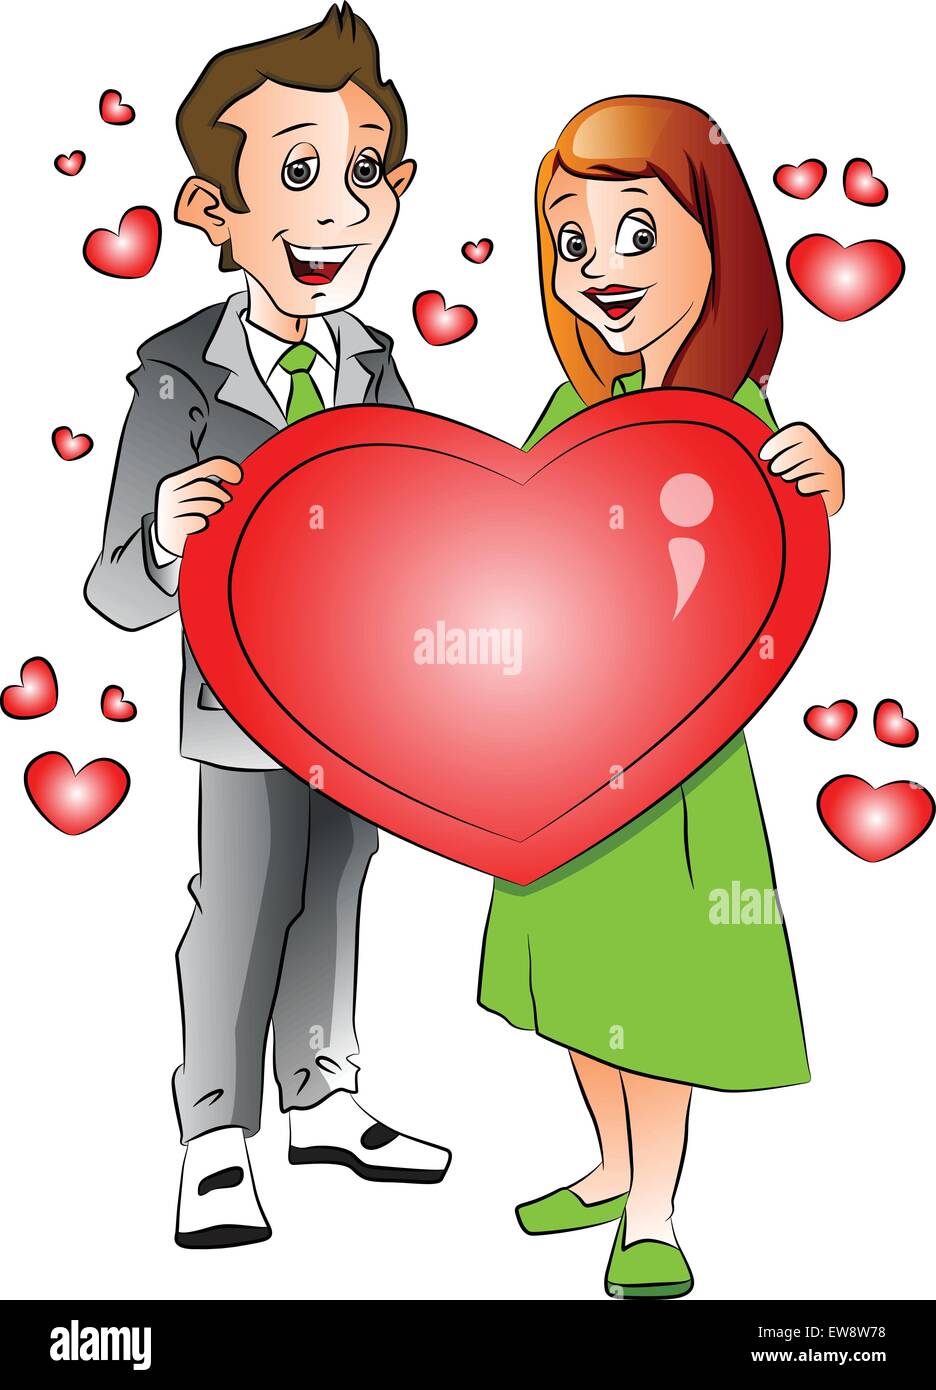 Vector illustration of cheerful young couple with red heart shape symbol. Stock Vector